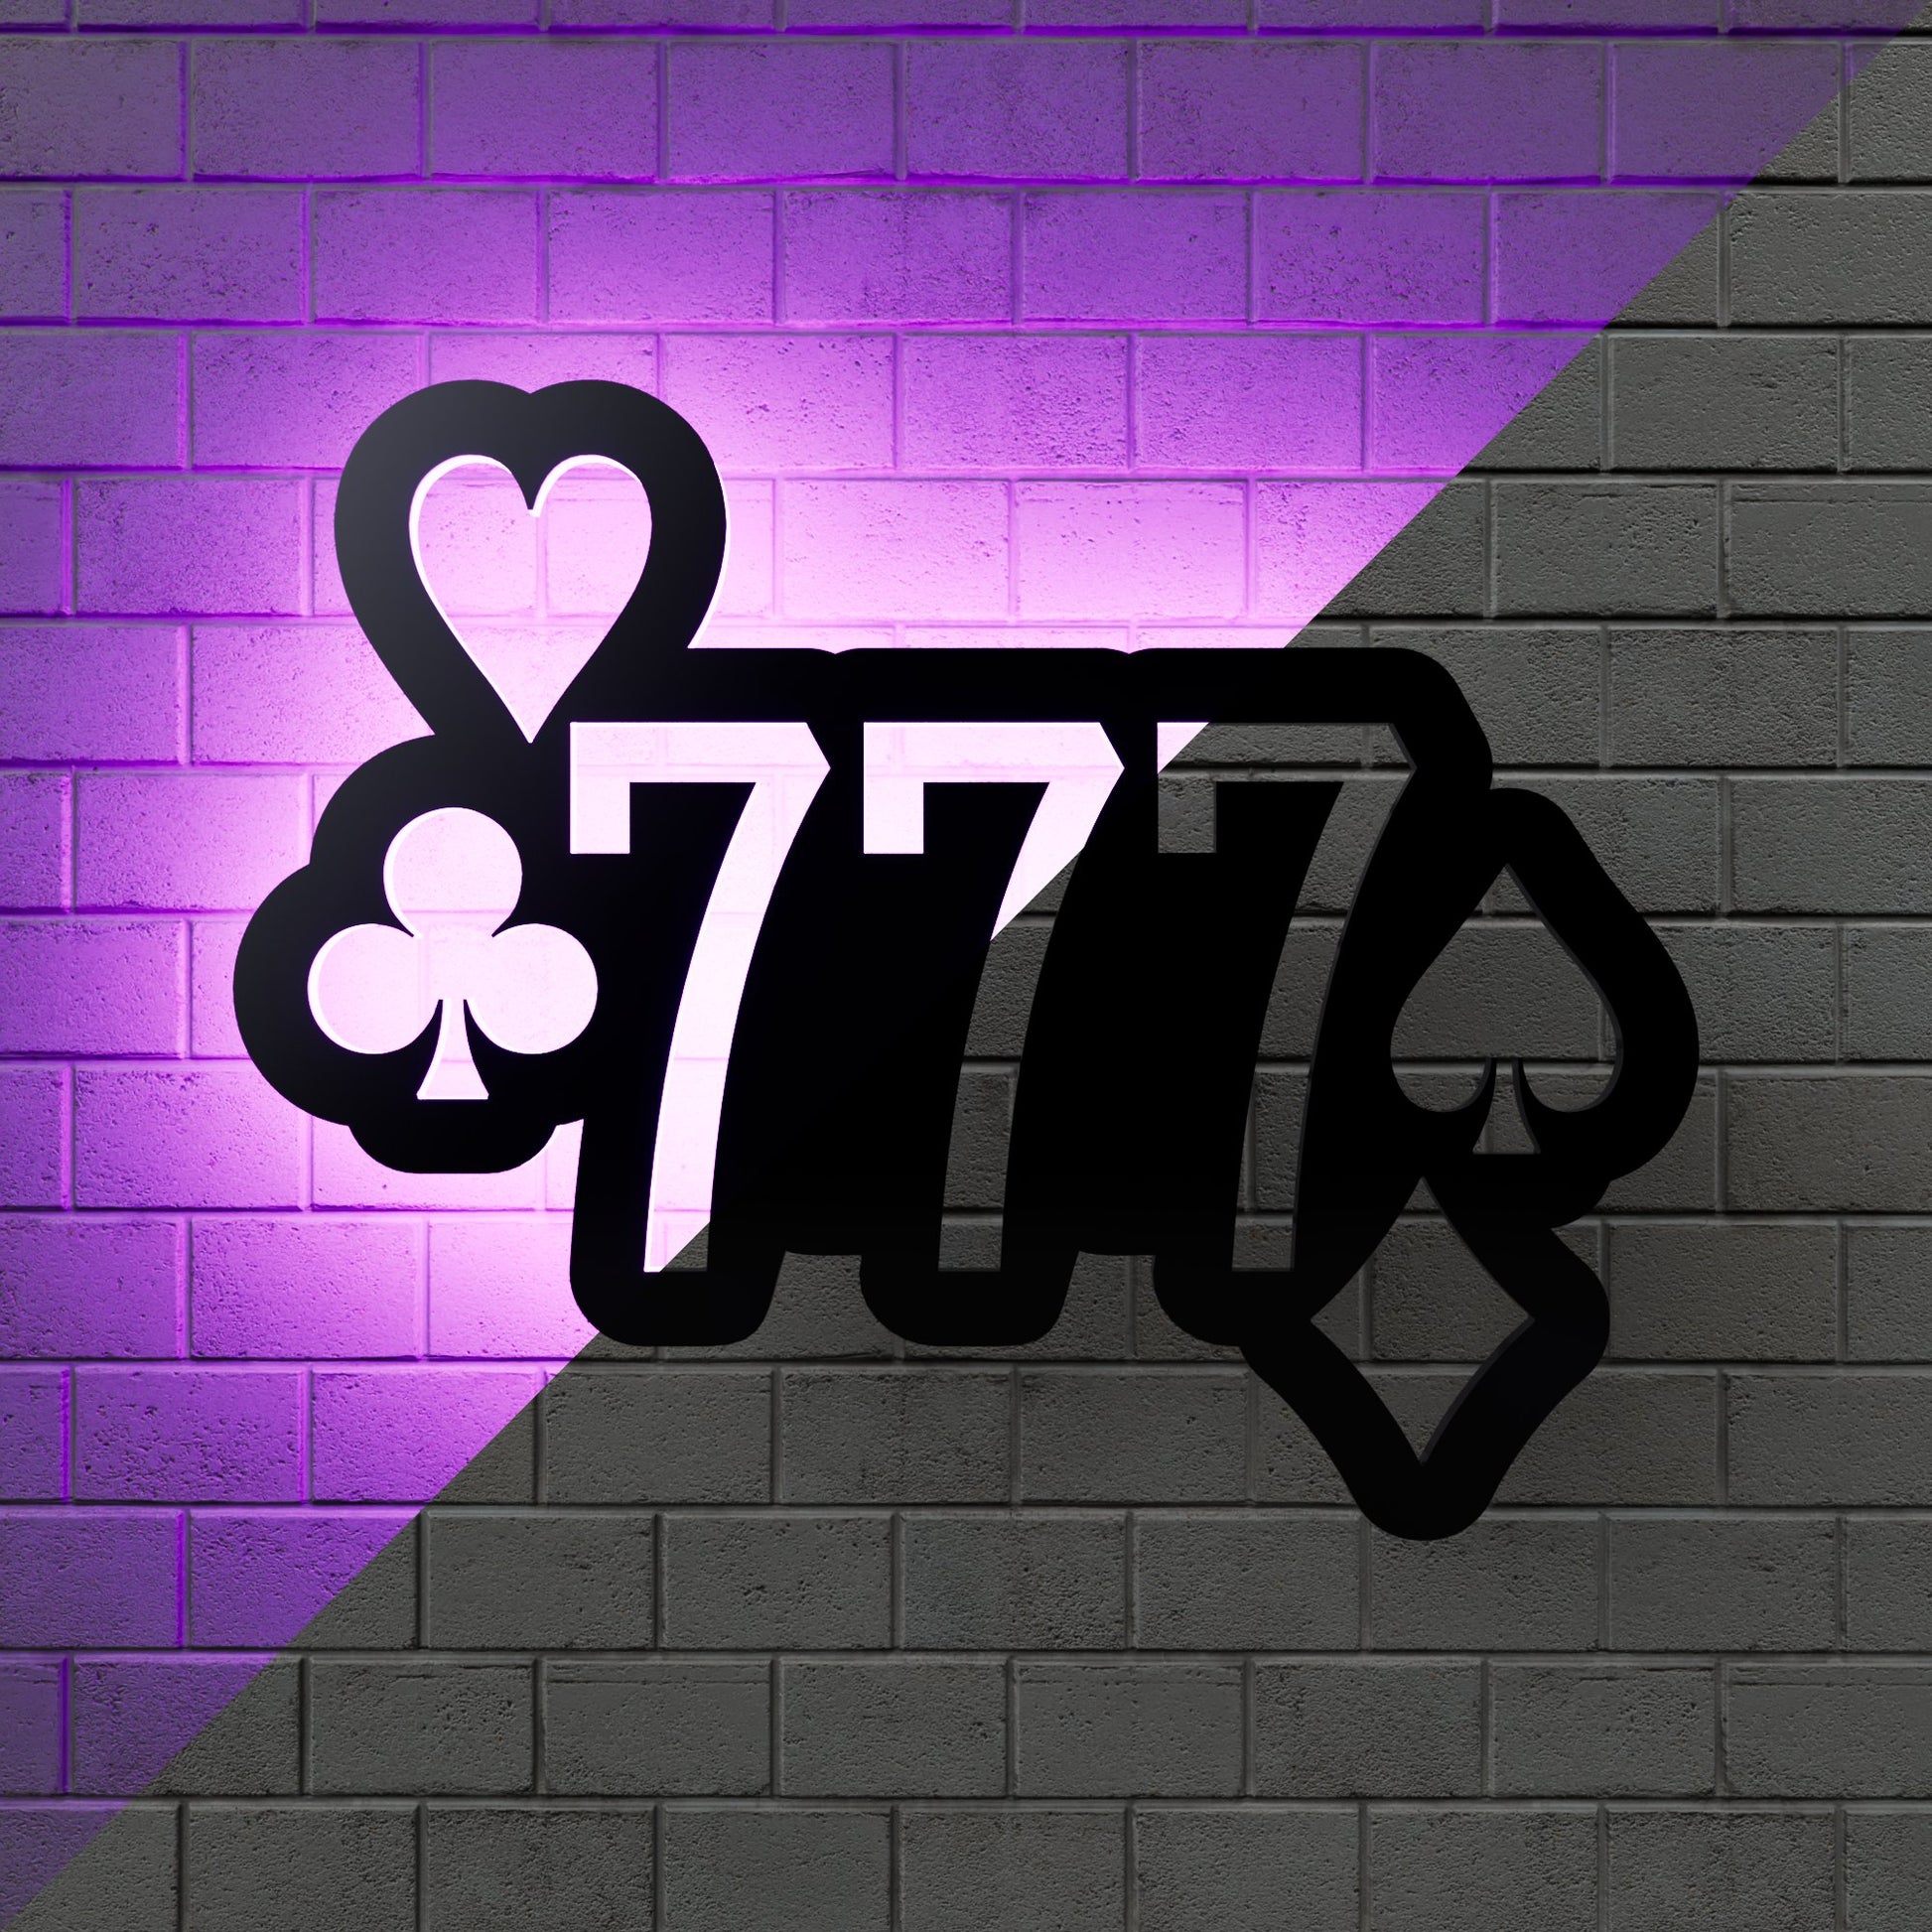 777 Slot Casino RGB Led Wall Sign: Elevate Your Game - Kutalp